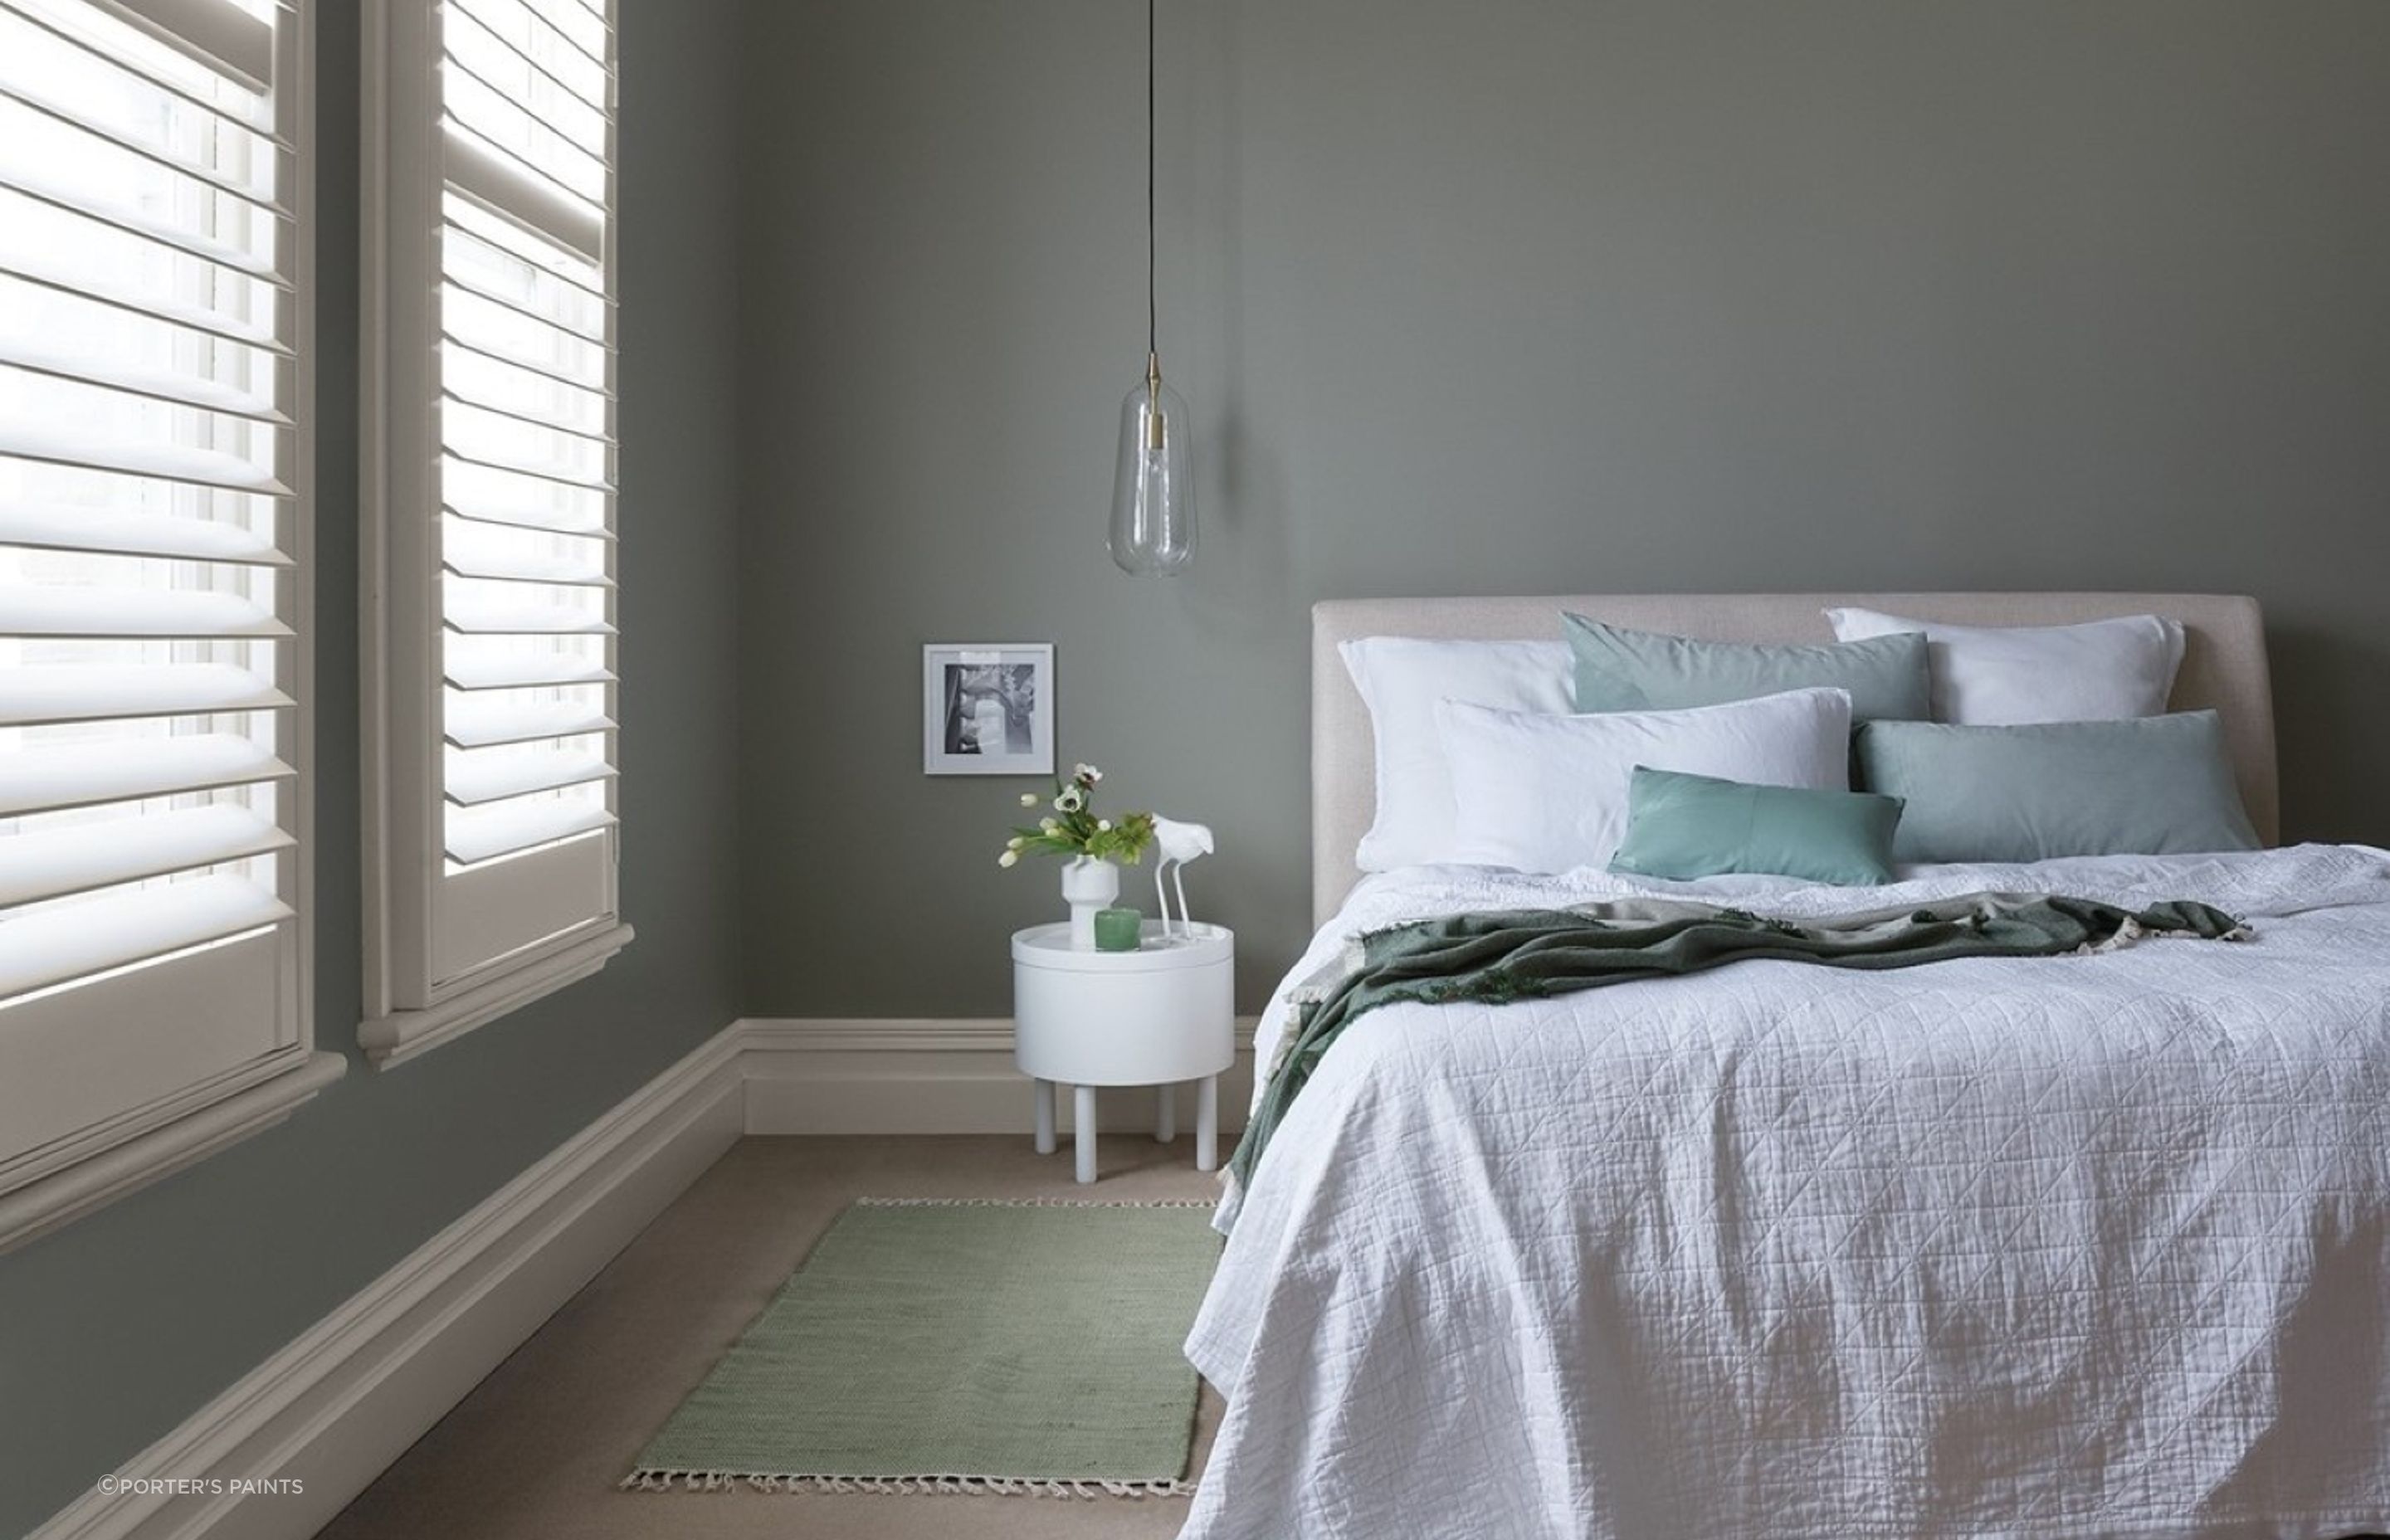 Blues and greens, like Porter's Paints Eggshell Acrylic Paint in French Green, can invoke a feeling of calmness and tranquillity.